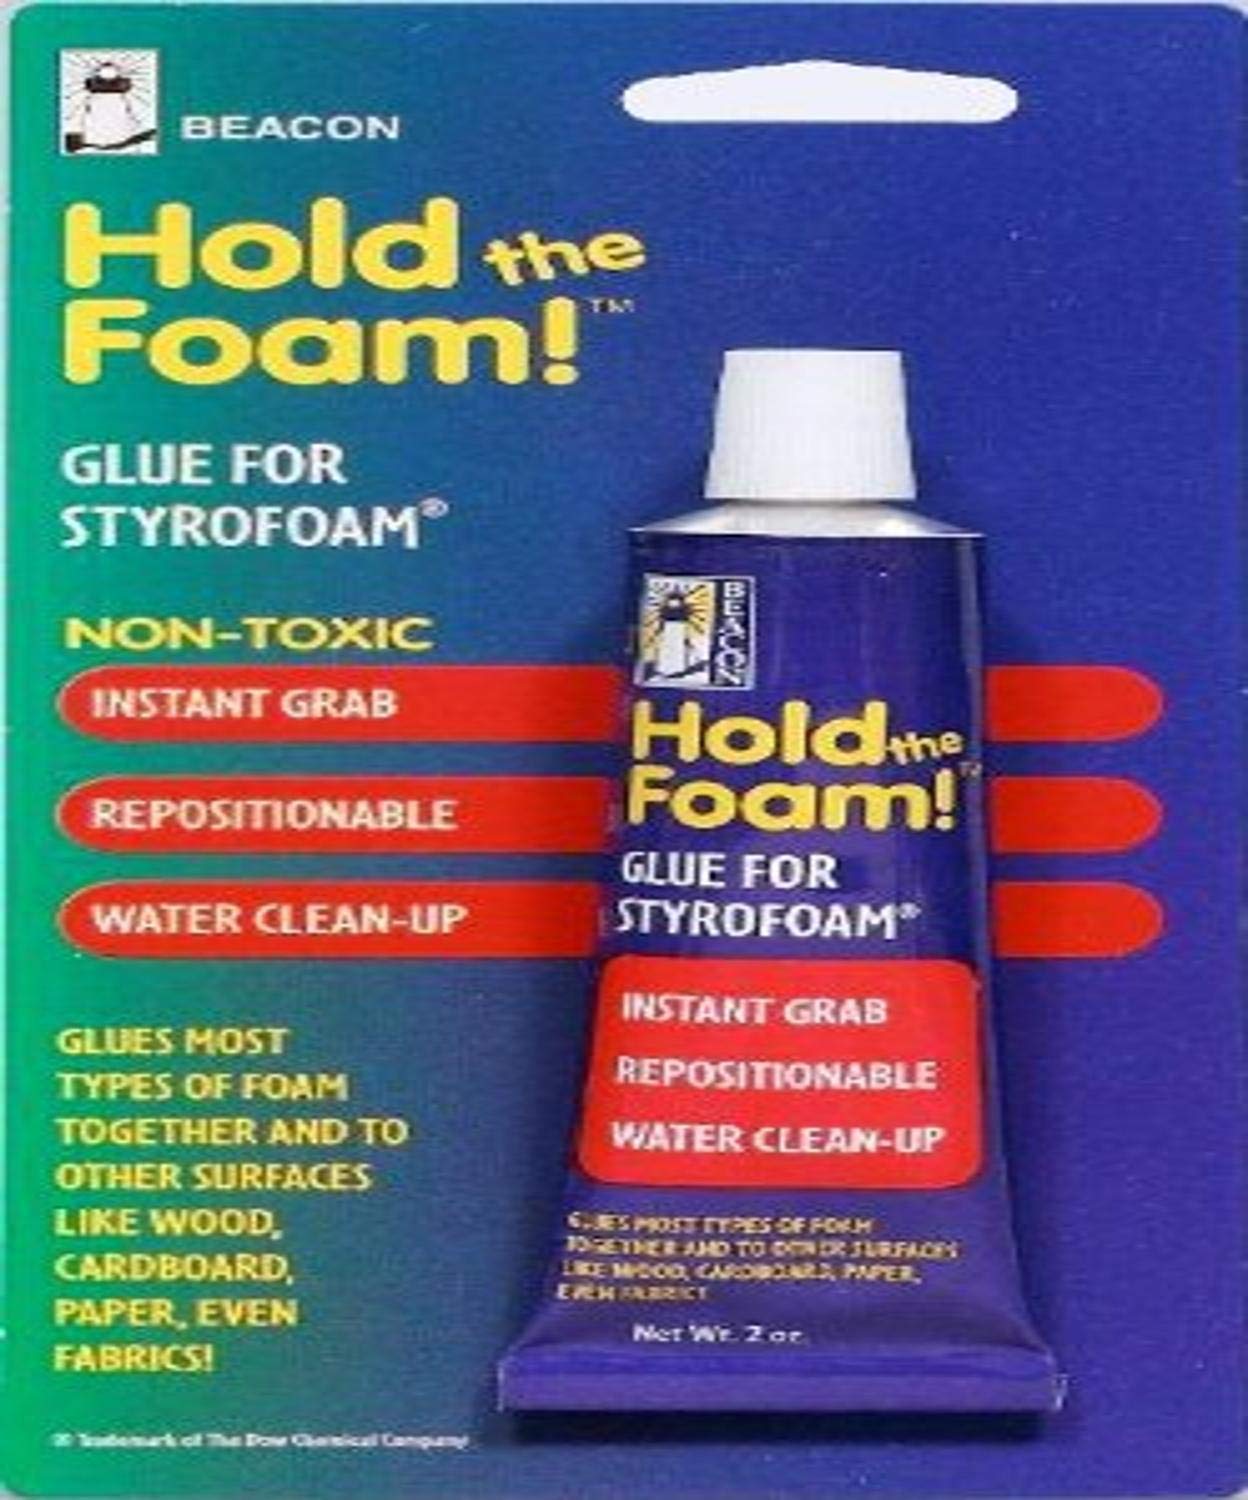 What Can I Use To Glue Styrofoam Together